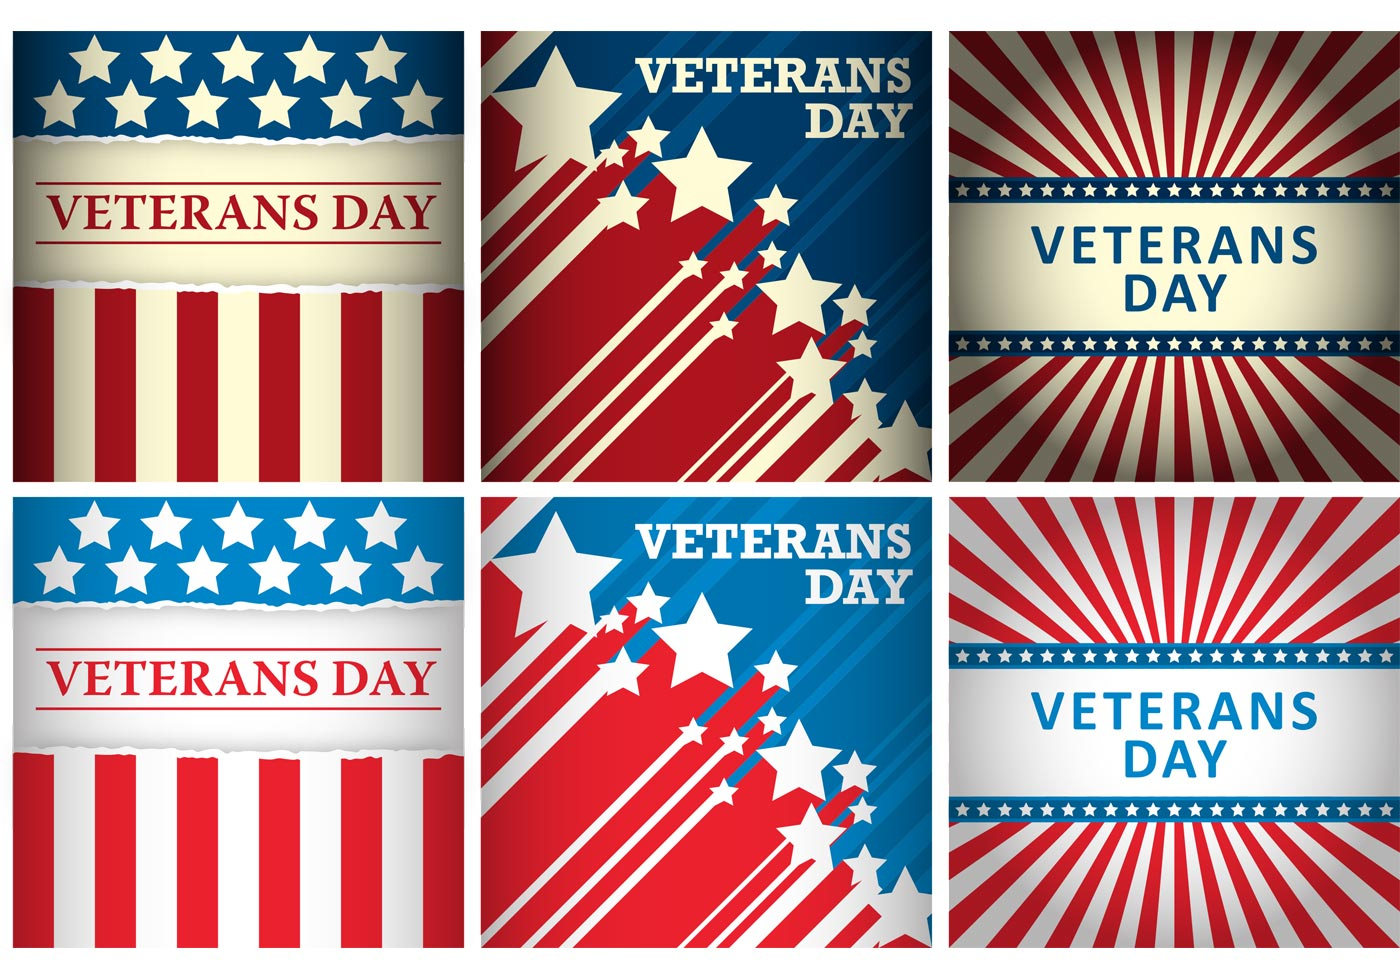 Happy Veterans Day Cards 2018, Thank You Greeting Ecards Free For - Veterans Day Free Printable Cards